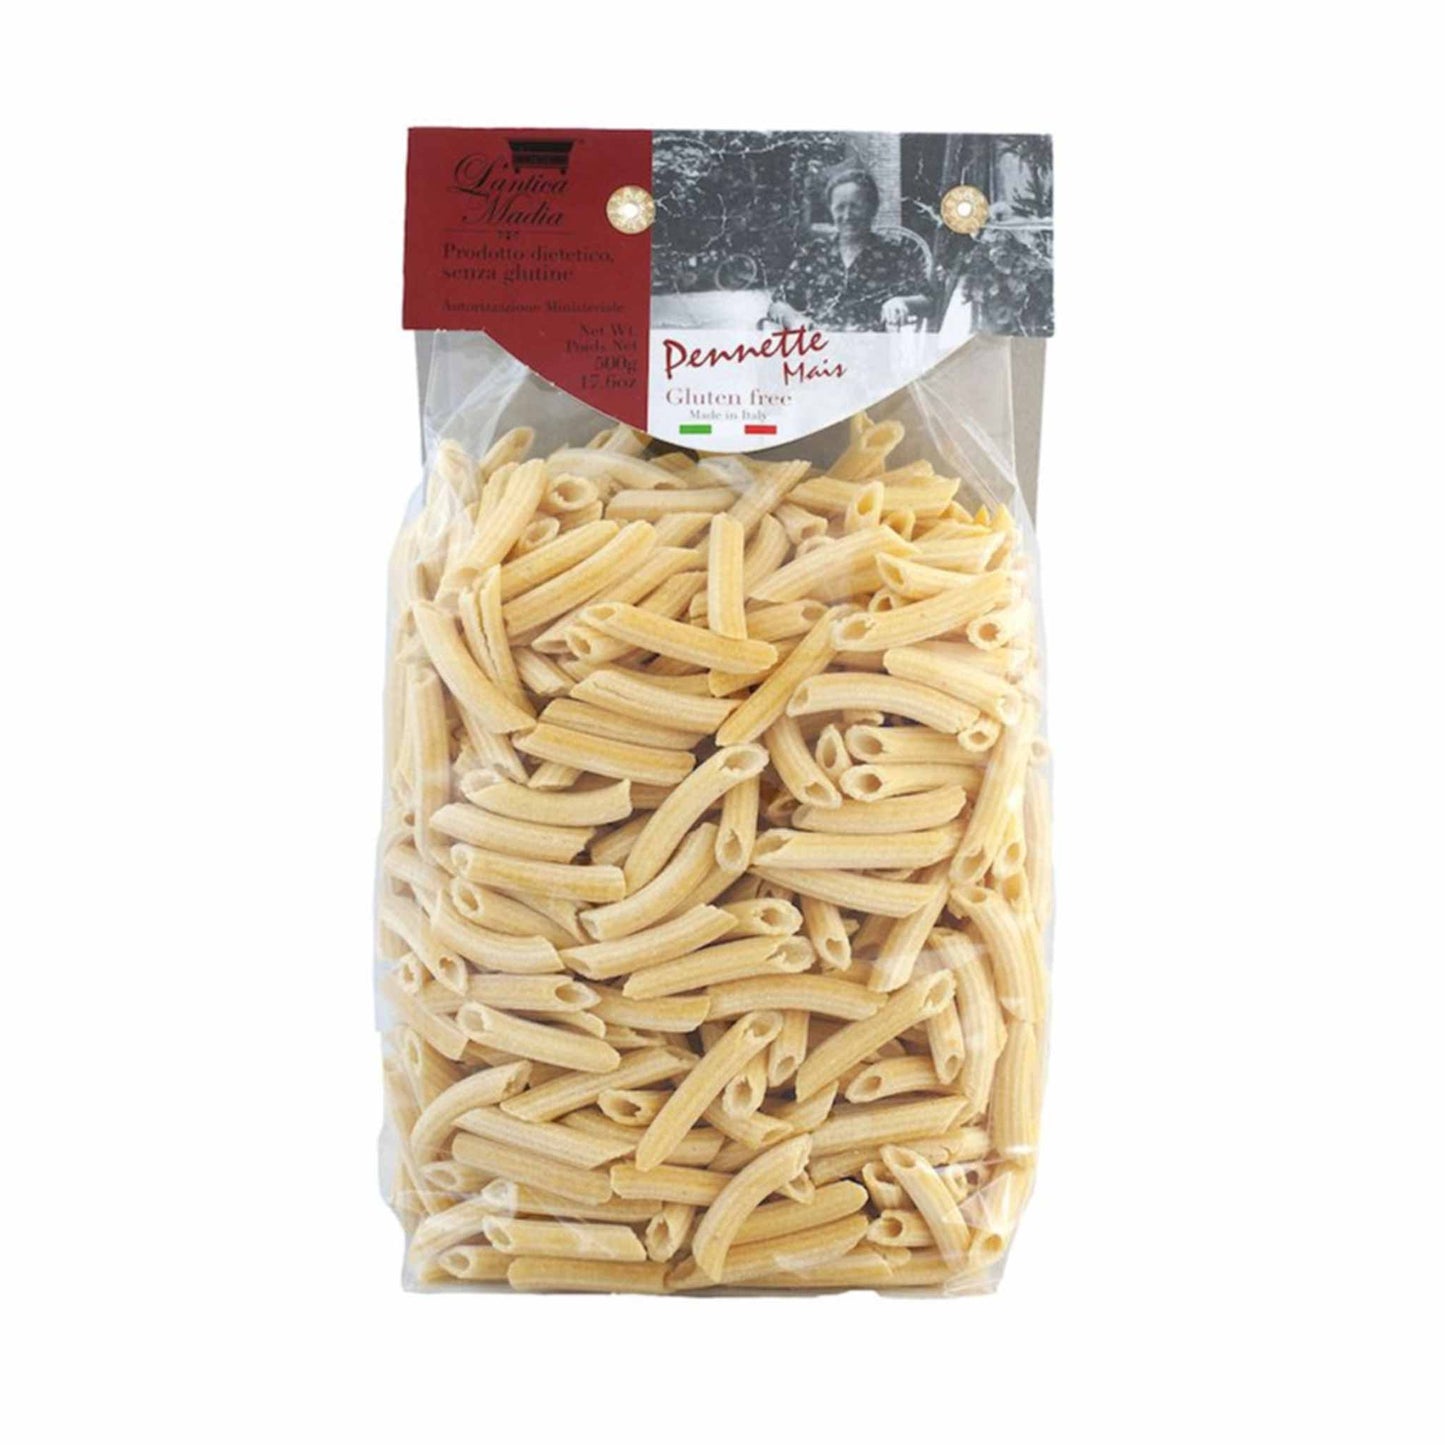 L'Antica Madia Gluten-free Pennette 500g - Frankies Pantry and Cellar